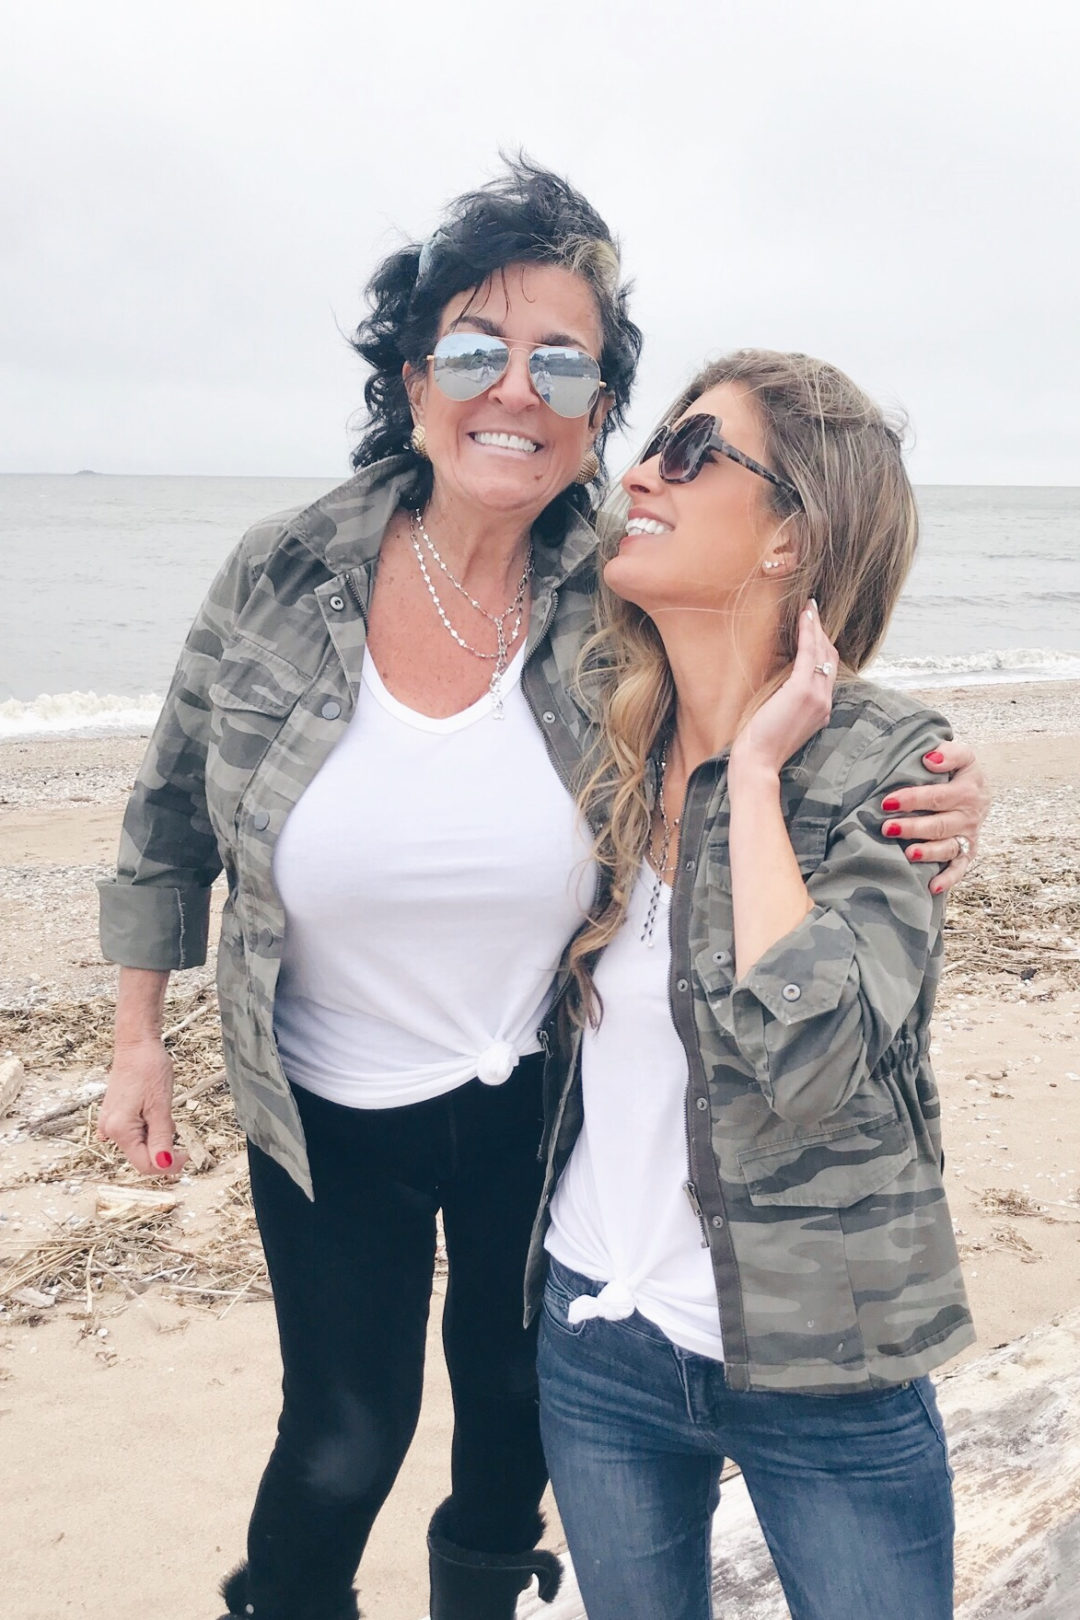 mother's day gift ideas 2019 - matching camo jackets - pinteresting plans and mother in law jane